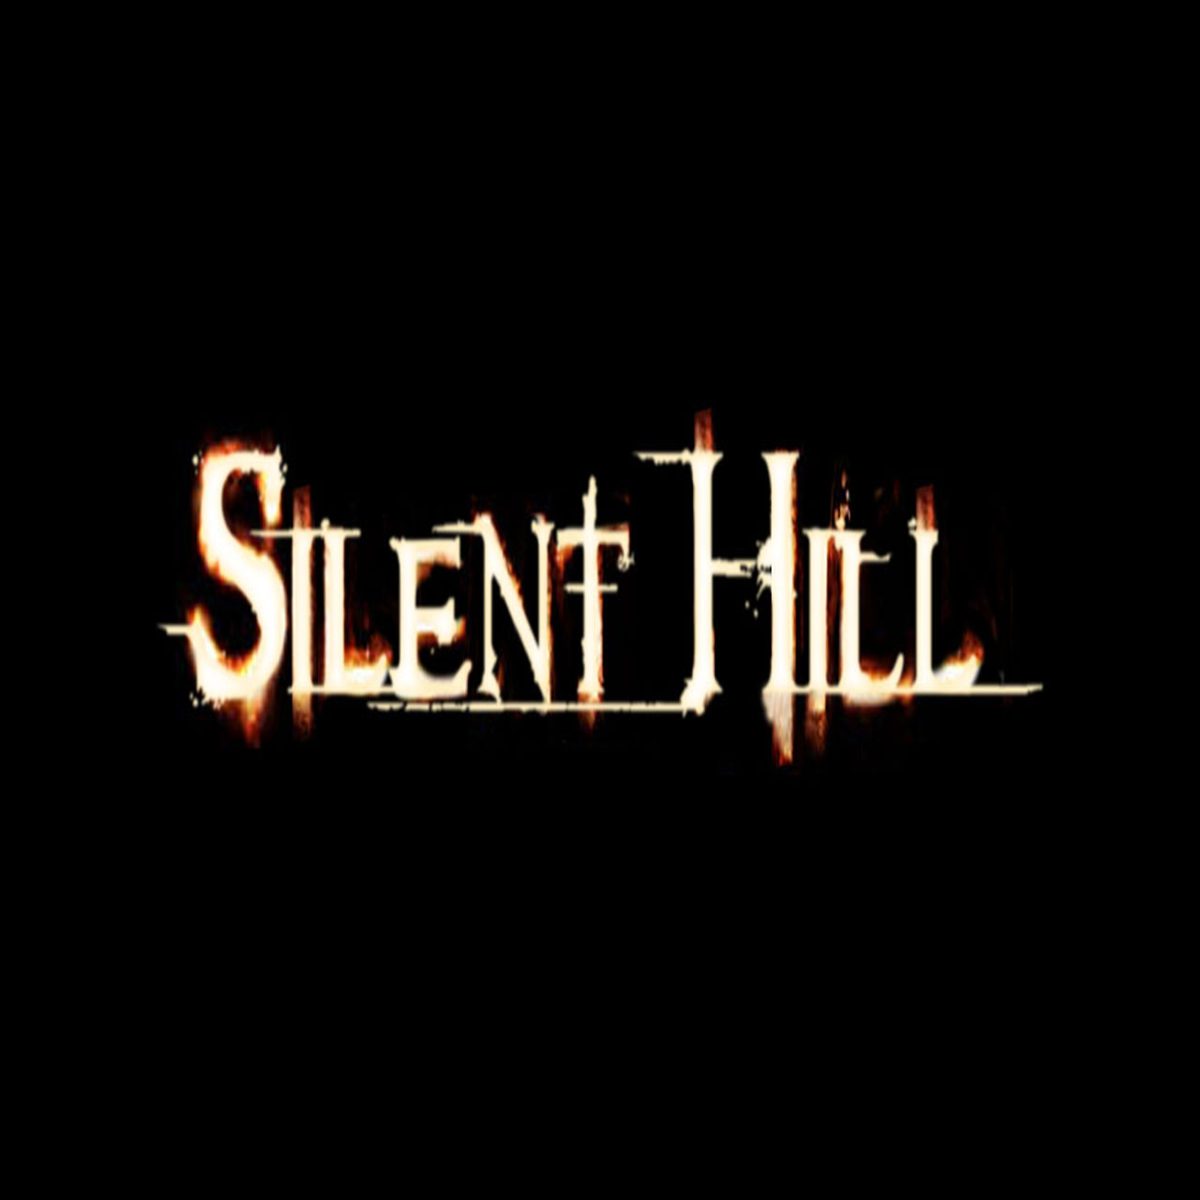 Hideo Kojima Reportedly Not That Interested in Silent Hills Return